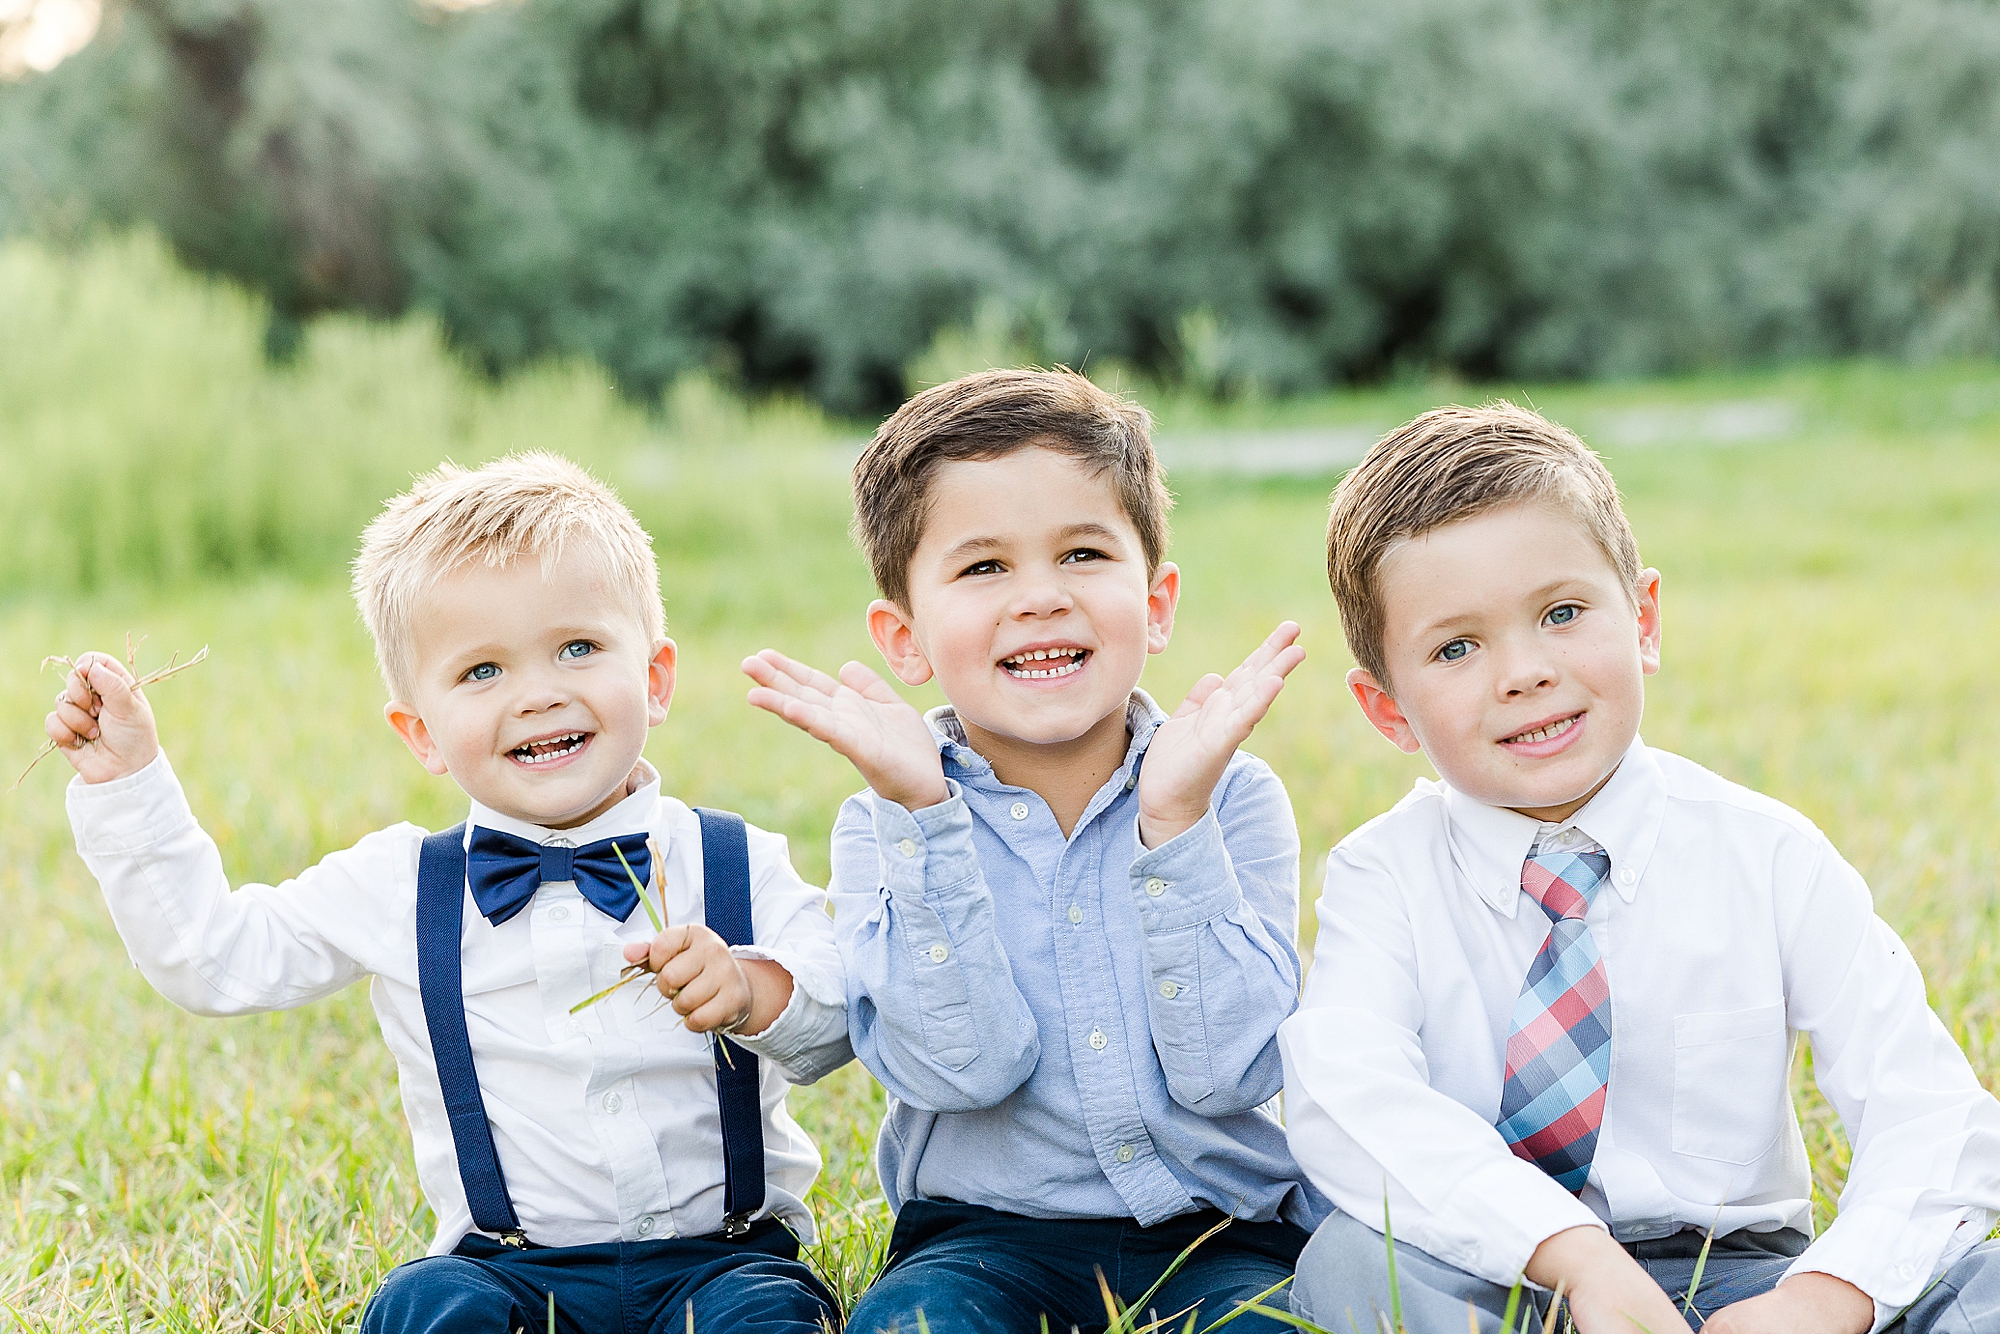 How to dress little boys for your family session